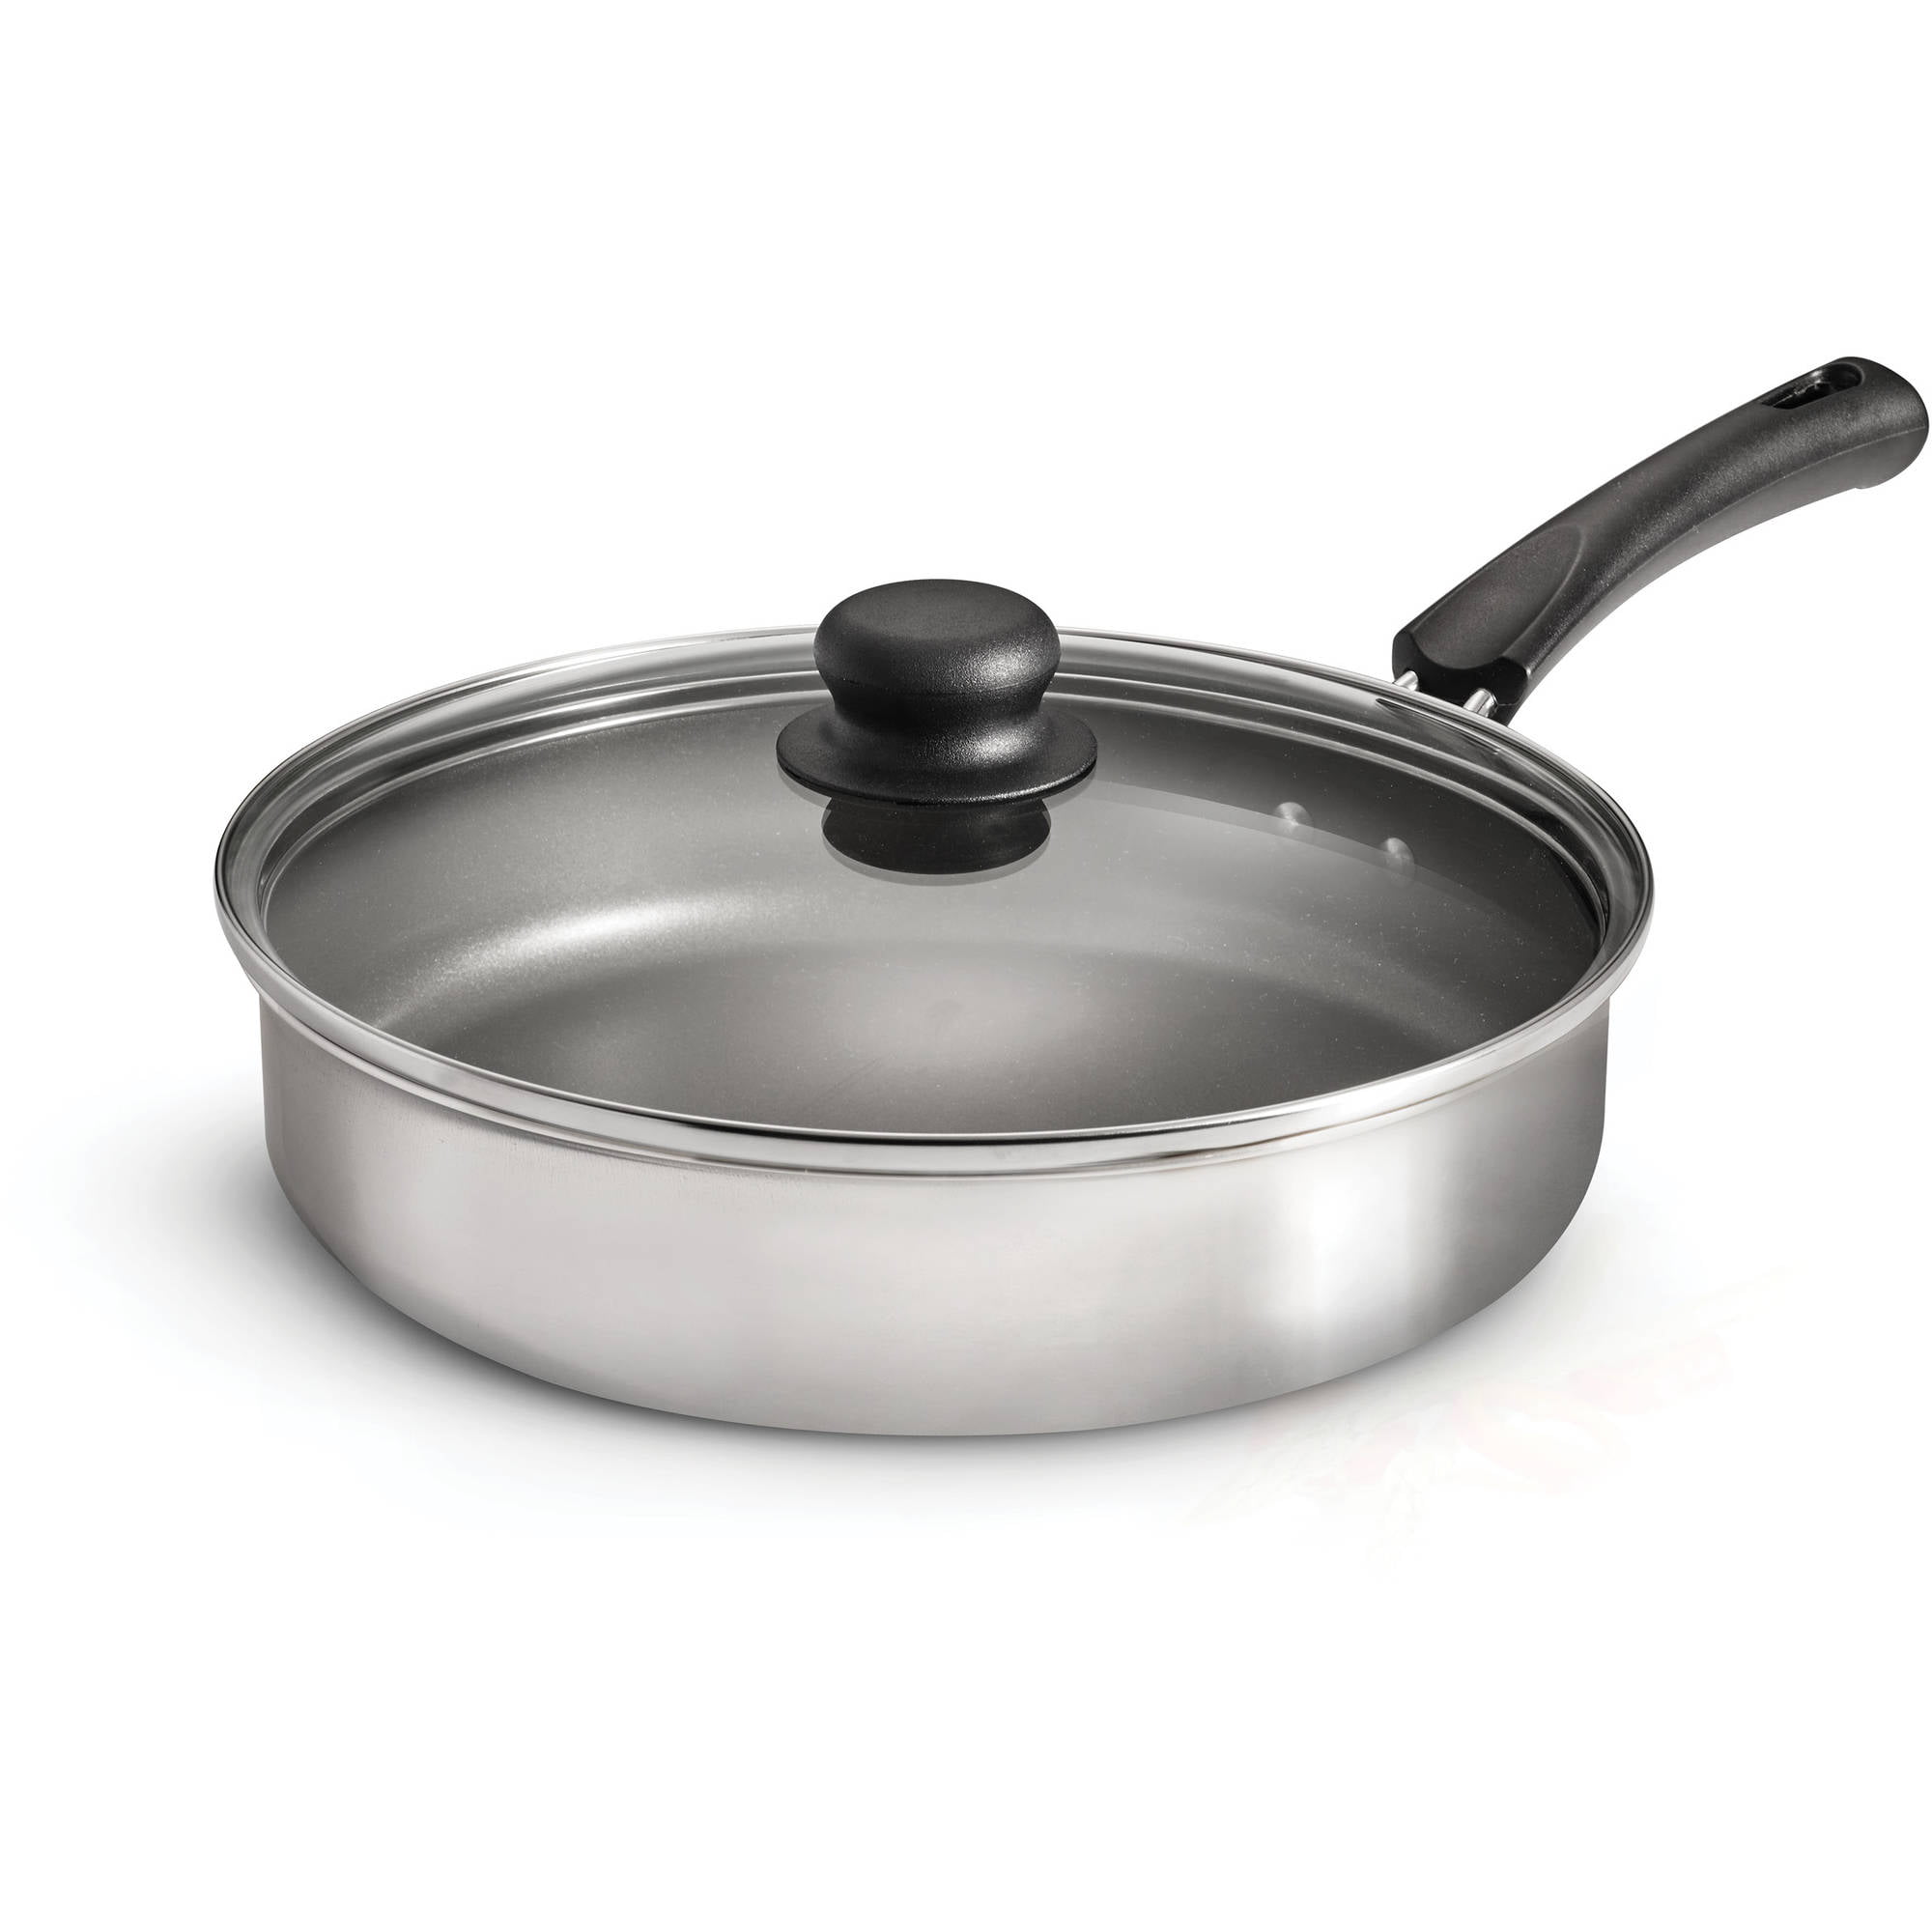 Polished Nonstick Covered Deep Saute Pan  in Heavy Duty Home Kitchen Cookware 